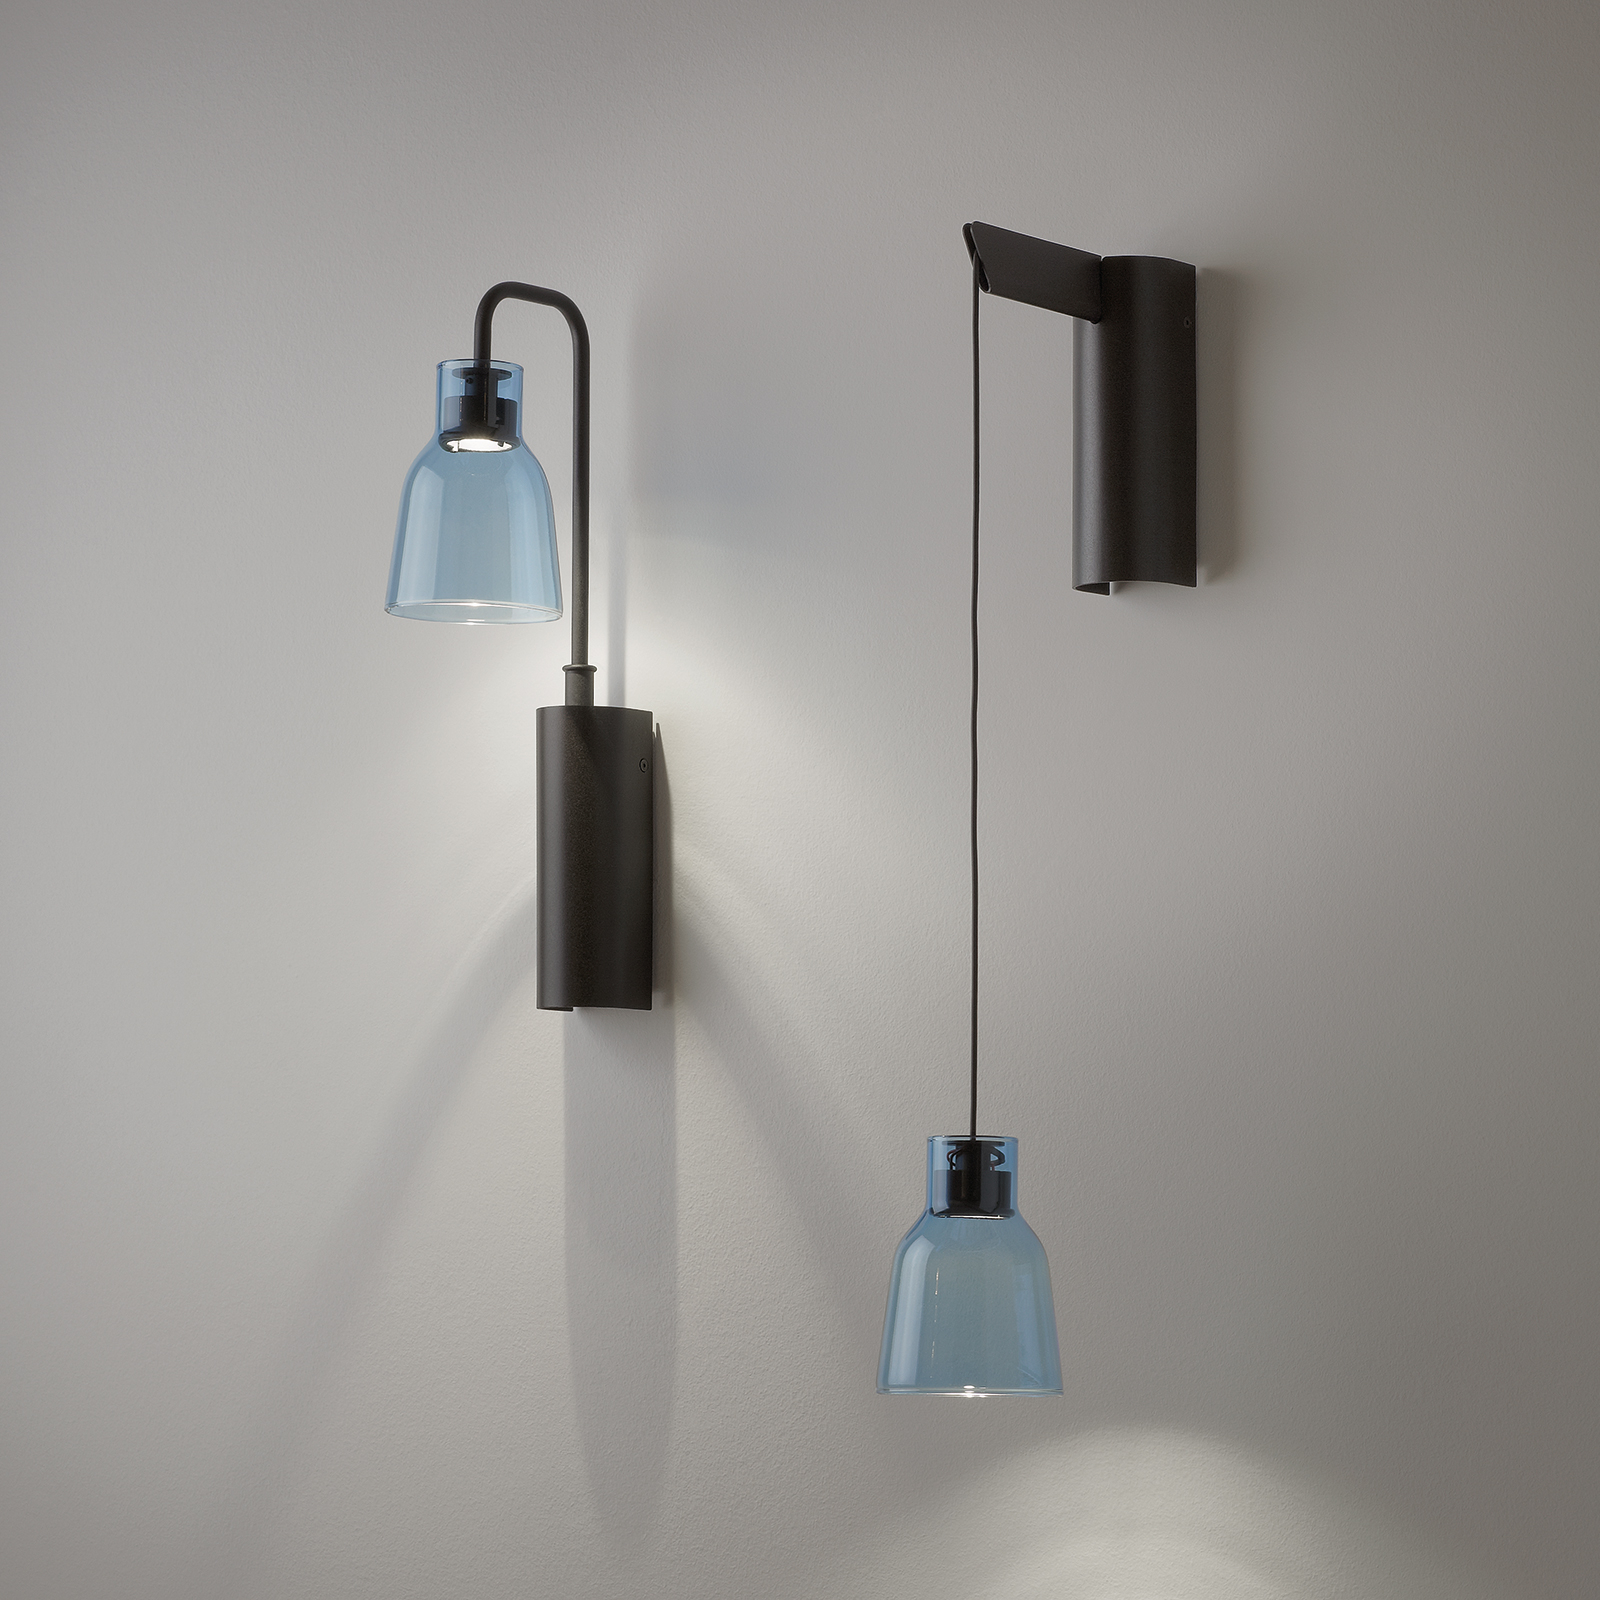 Bover Drip A/01 LED wall light, blue